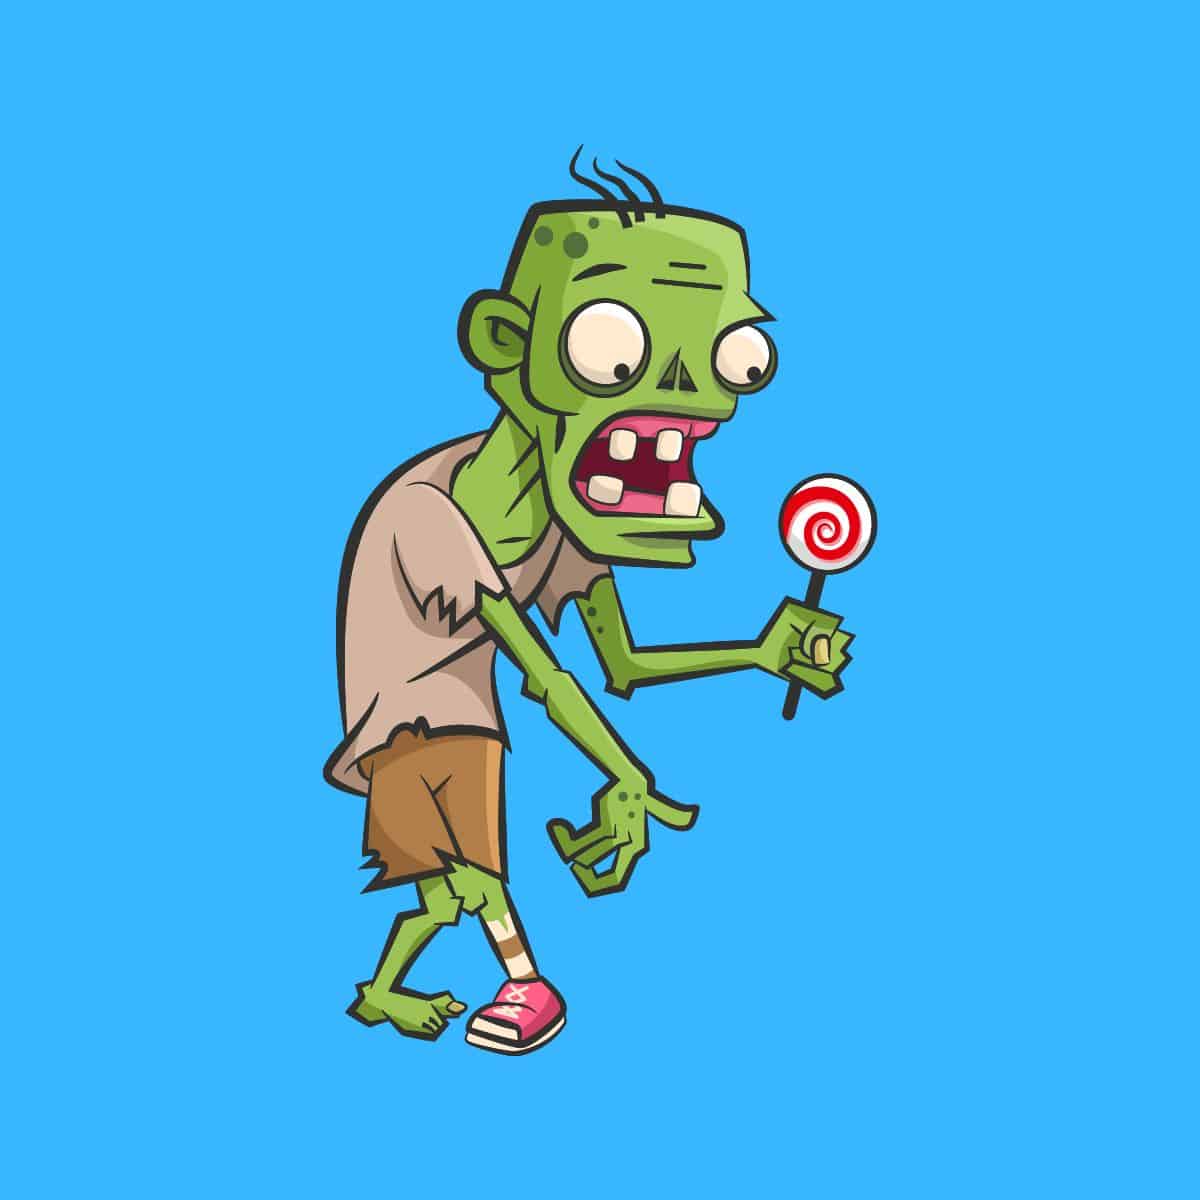 Cartoon graphic of a green zombie holding a red and white lollipop on a blue background.